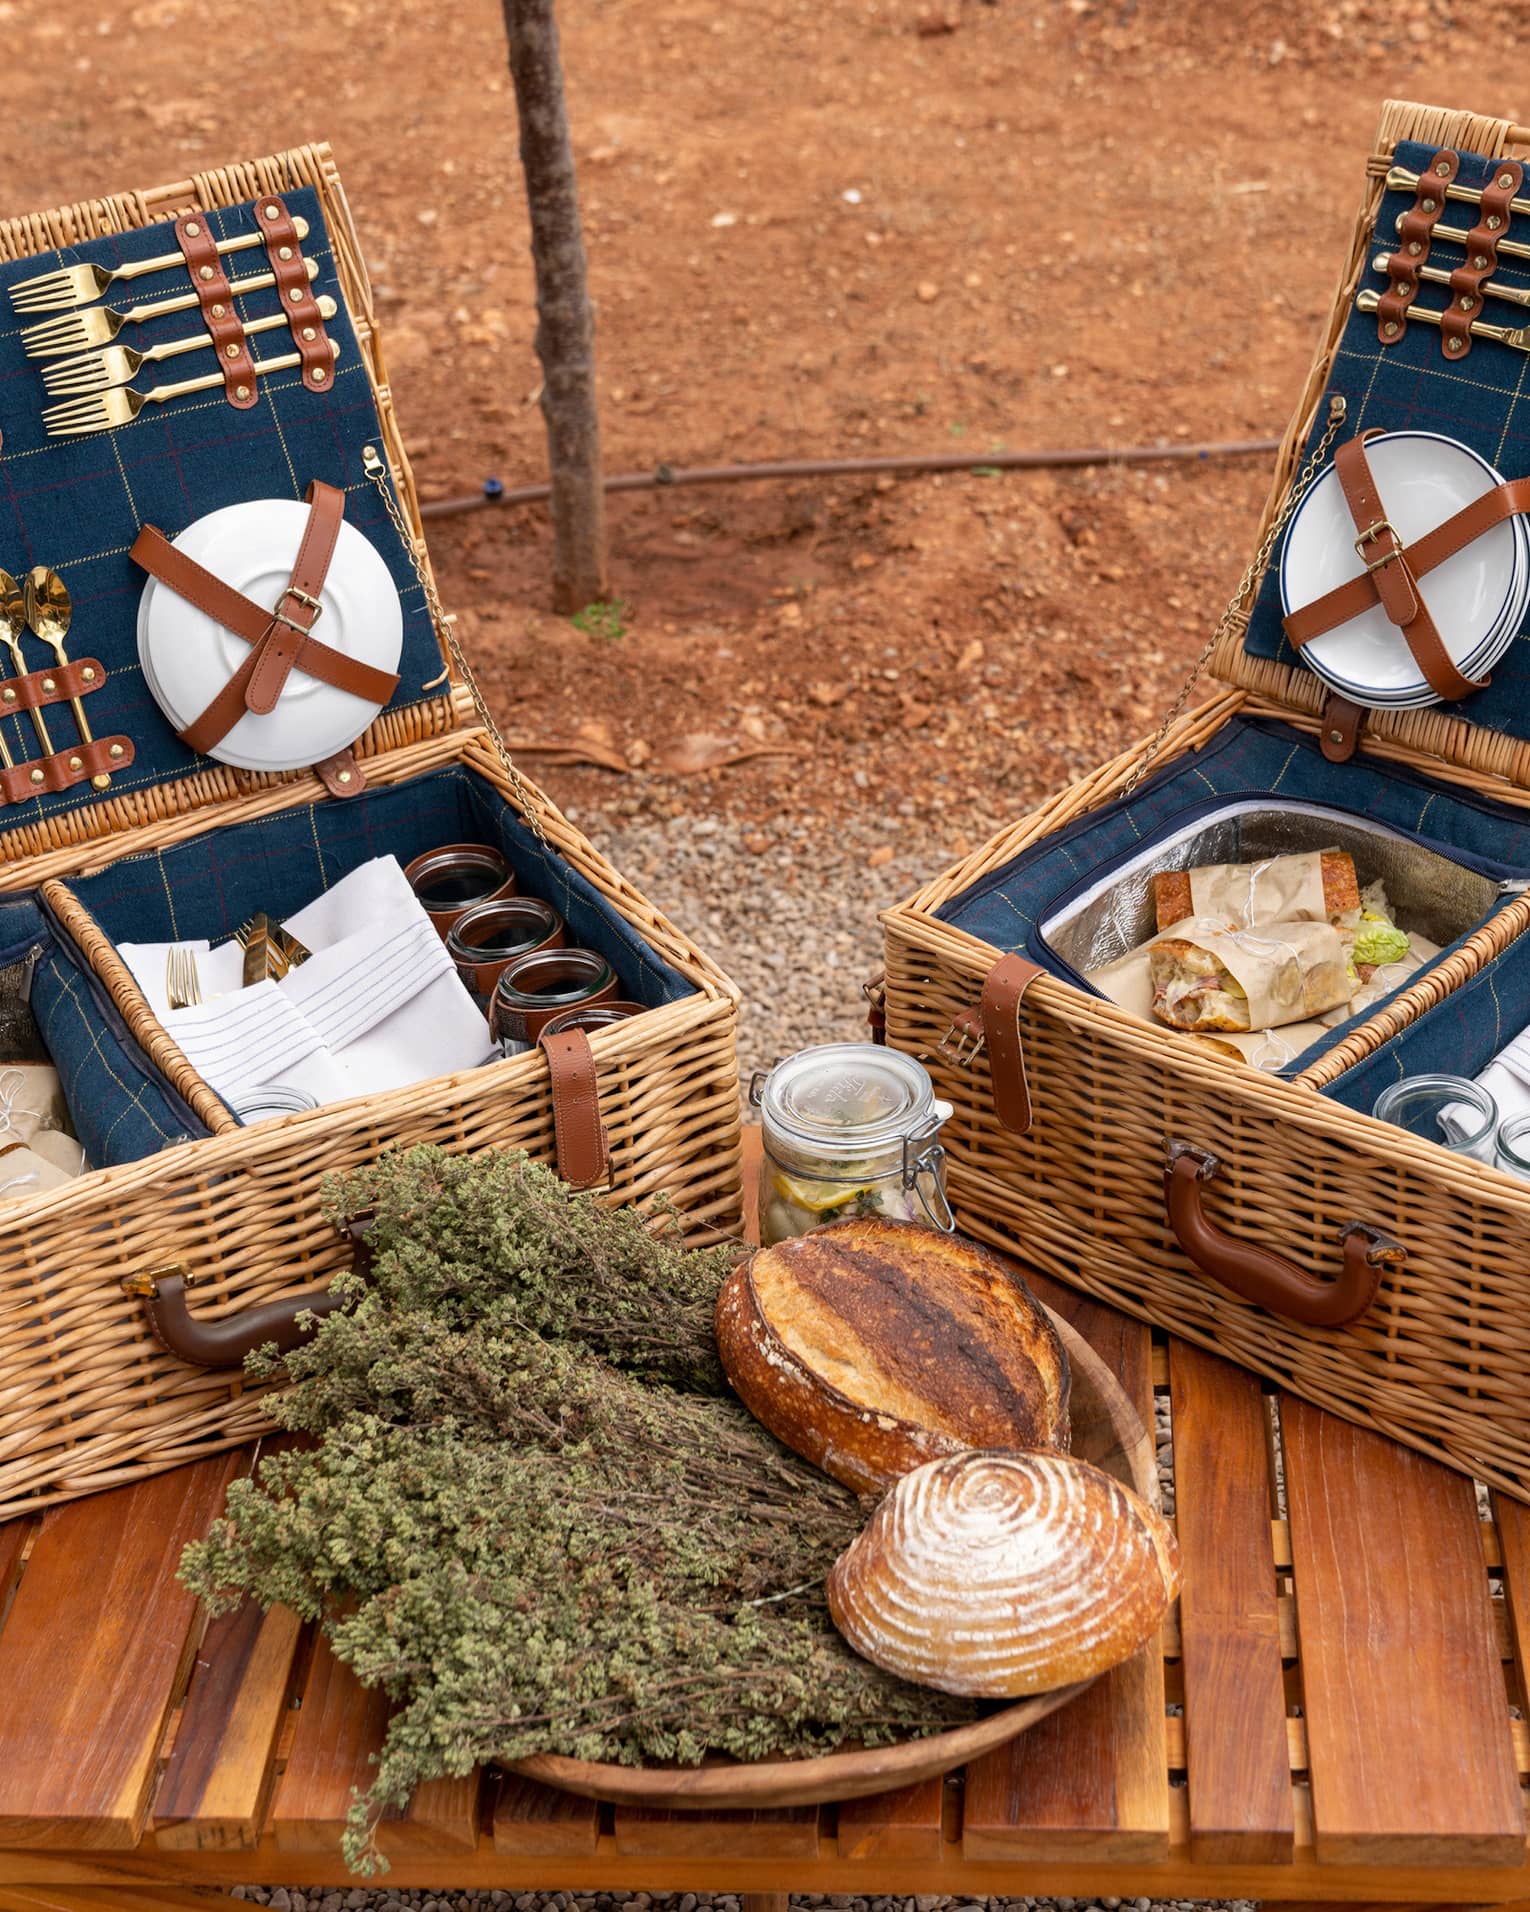 Plates and gold cutlery secured to the lids of picnic baskets containing parchment-wrapped sandwiches, napkins, and glasses.